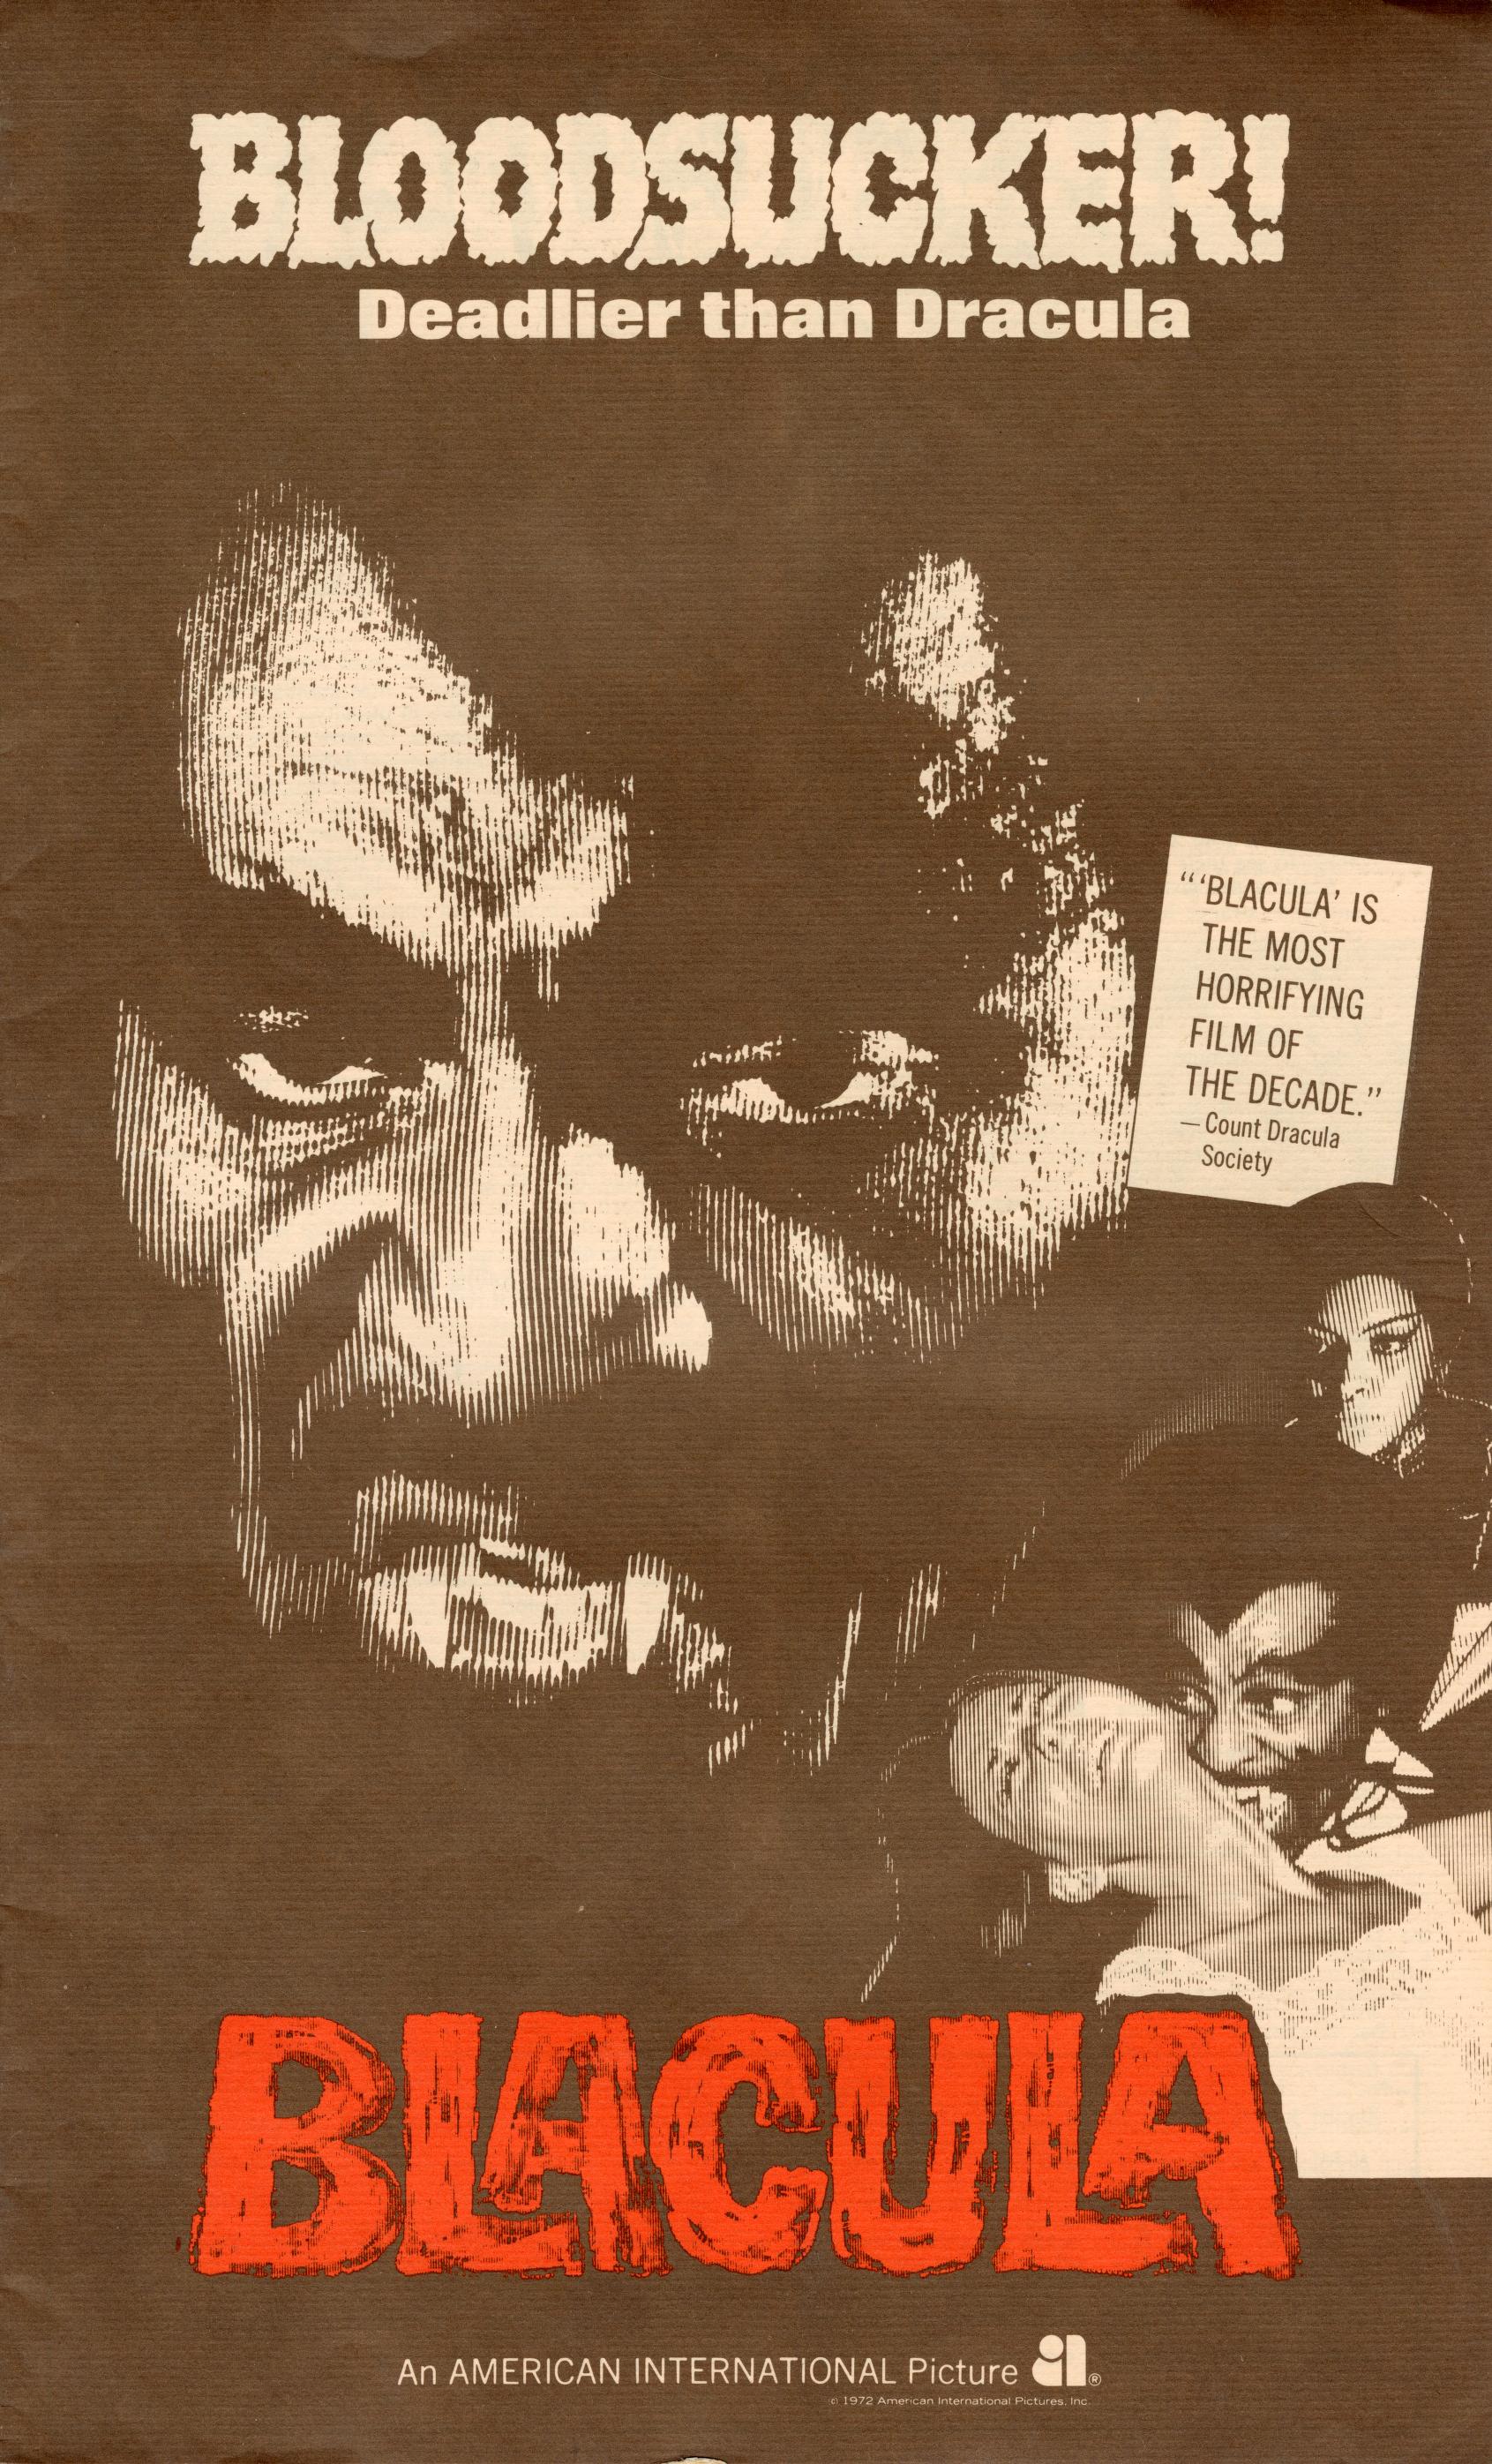 Blacula (American International Pictures) [1972] | Media History 